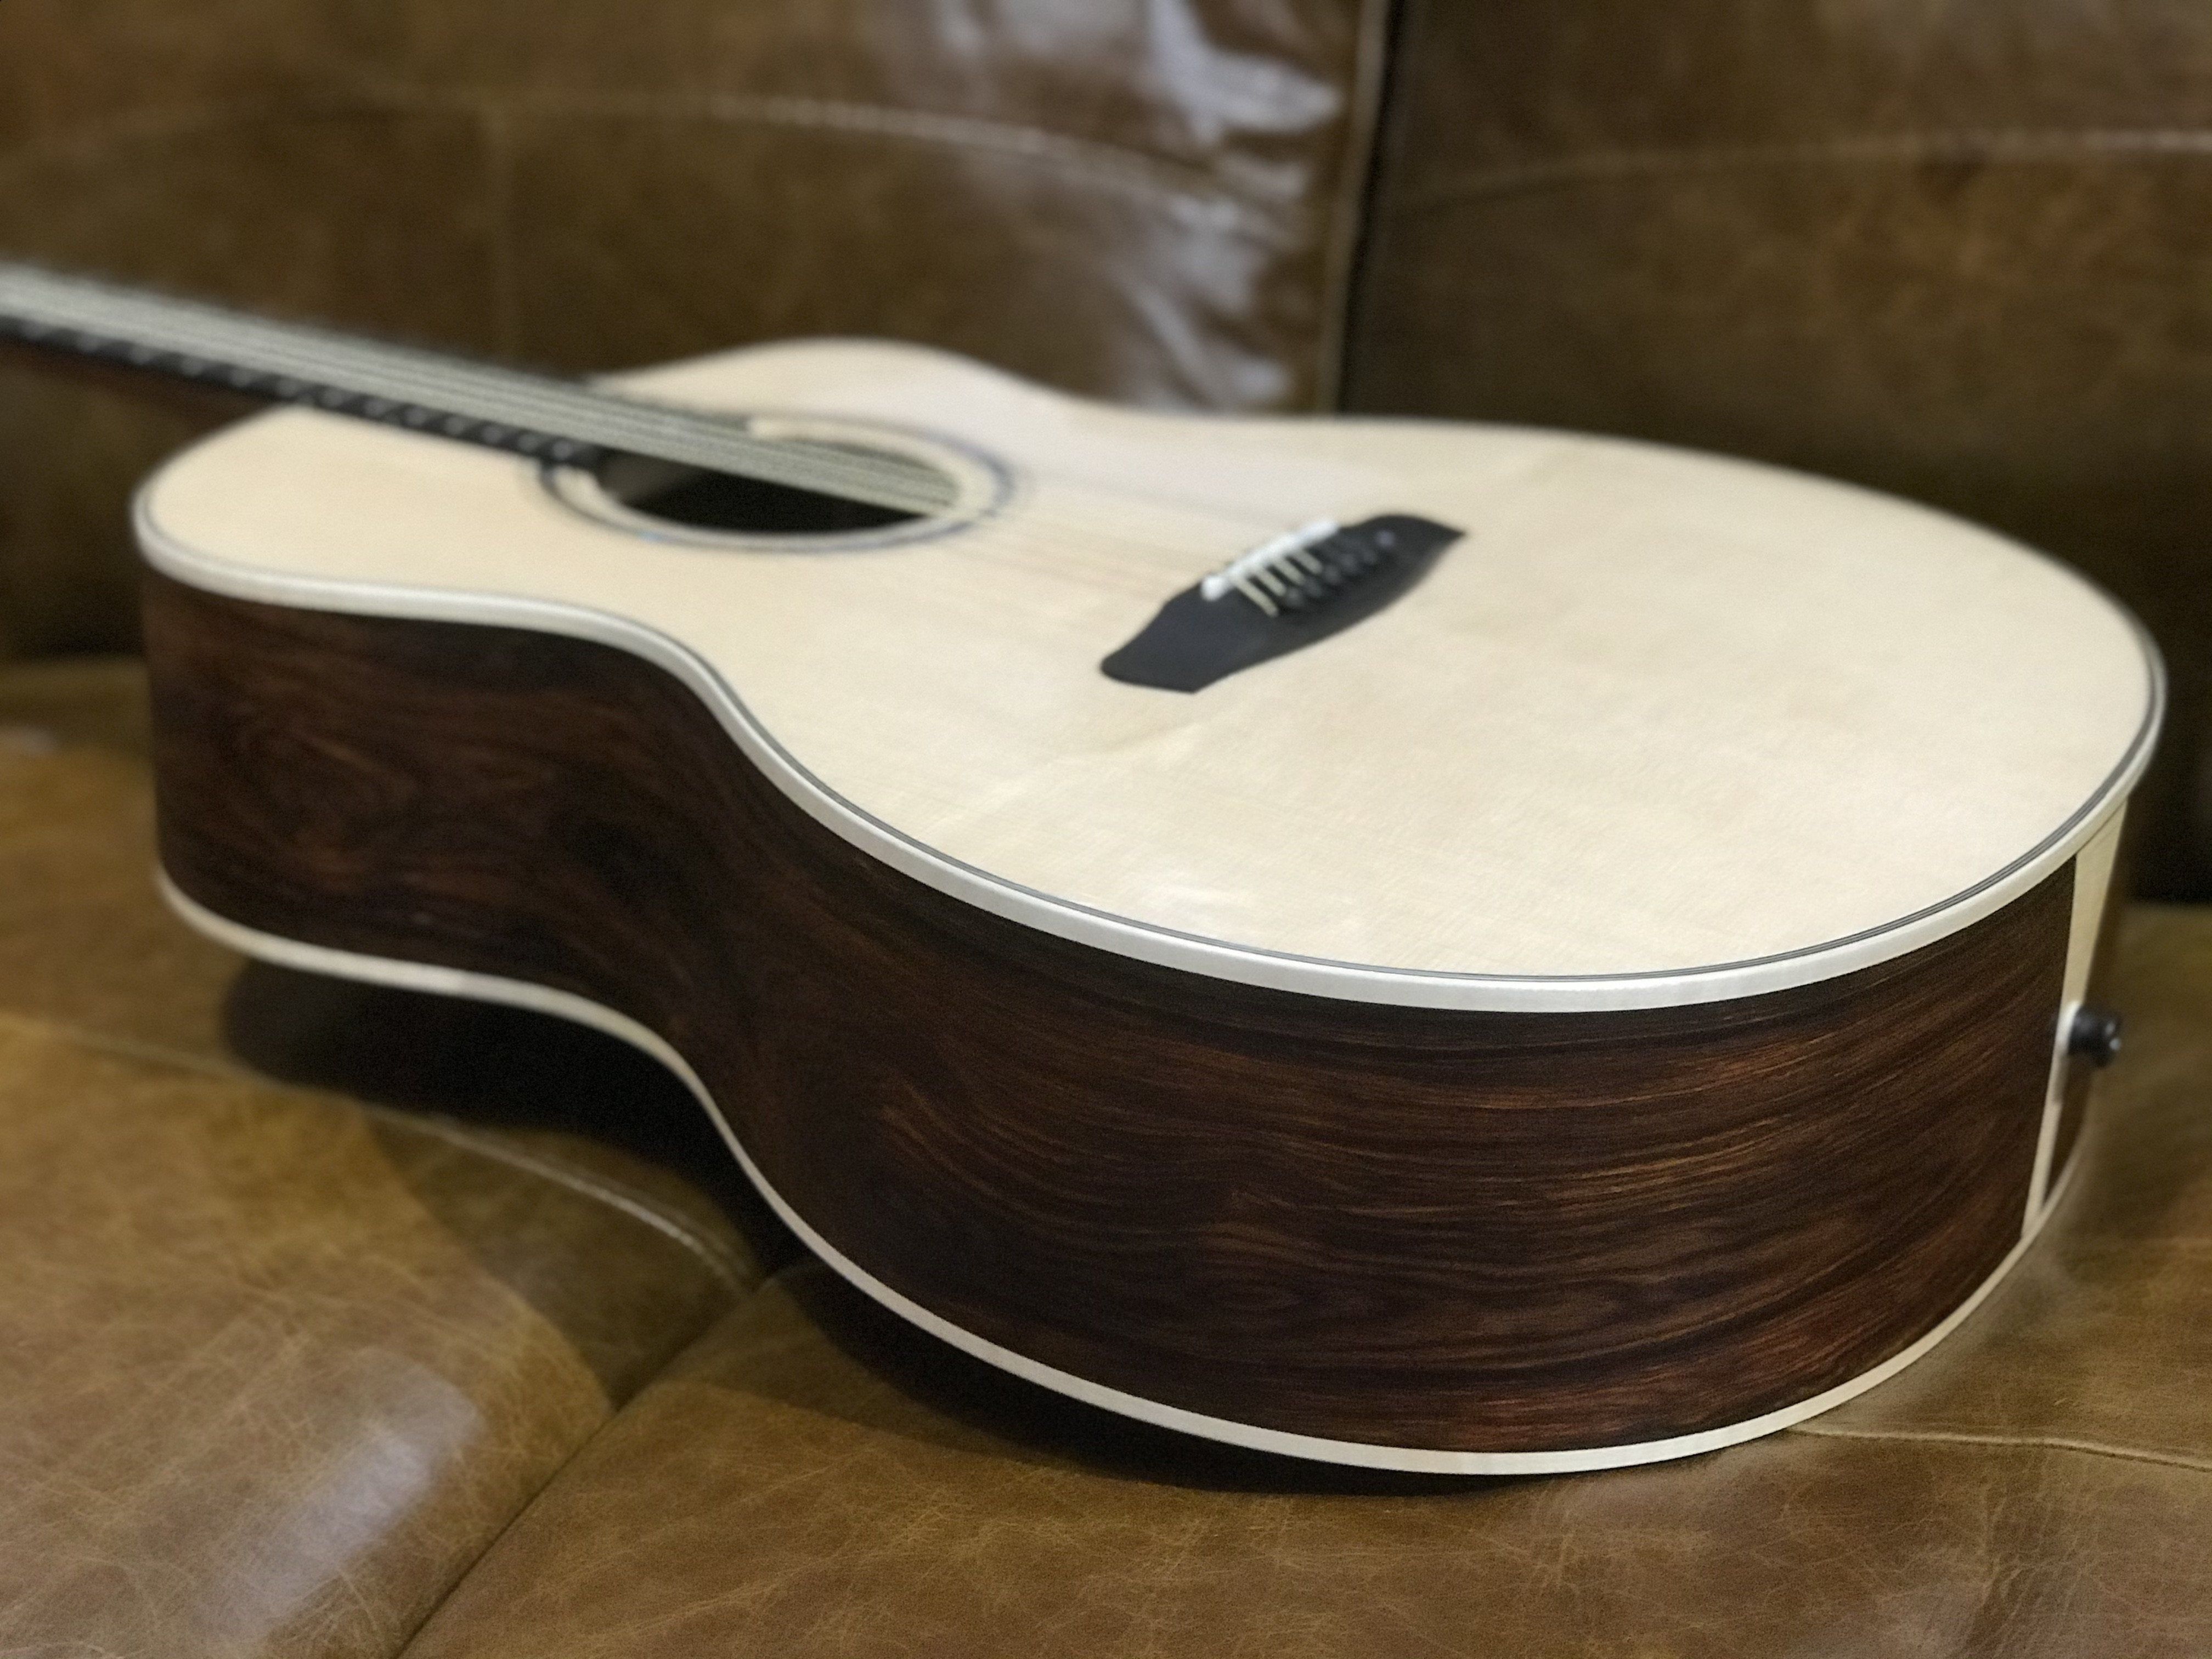 Dowina Cocobolo Trio Plate (Cocobolo III) D-SWS, Acoustic Guitar for sale at Richards Guitars.